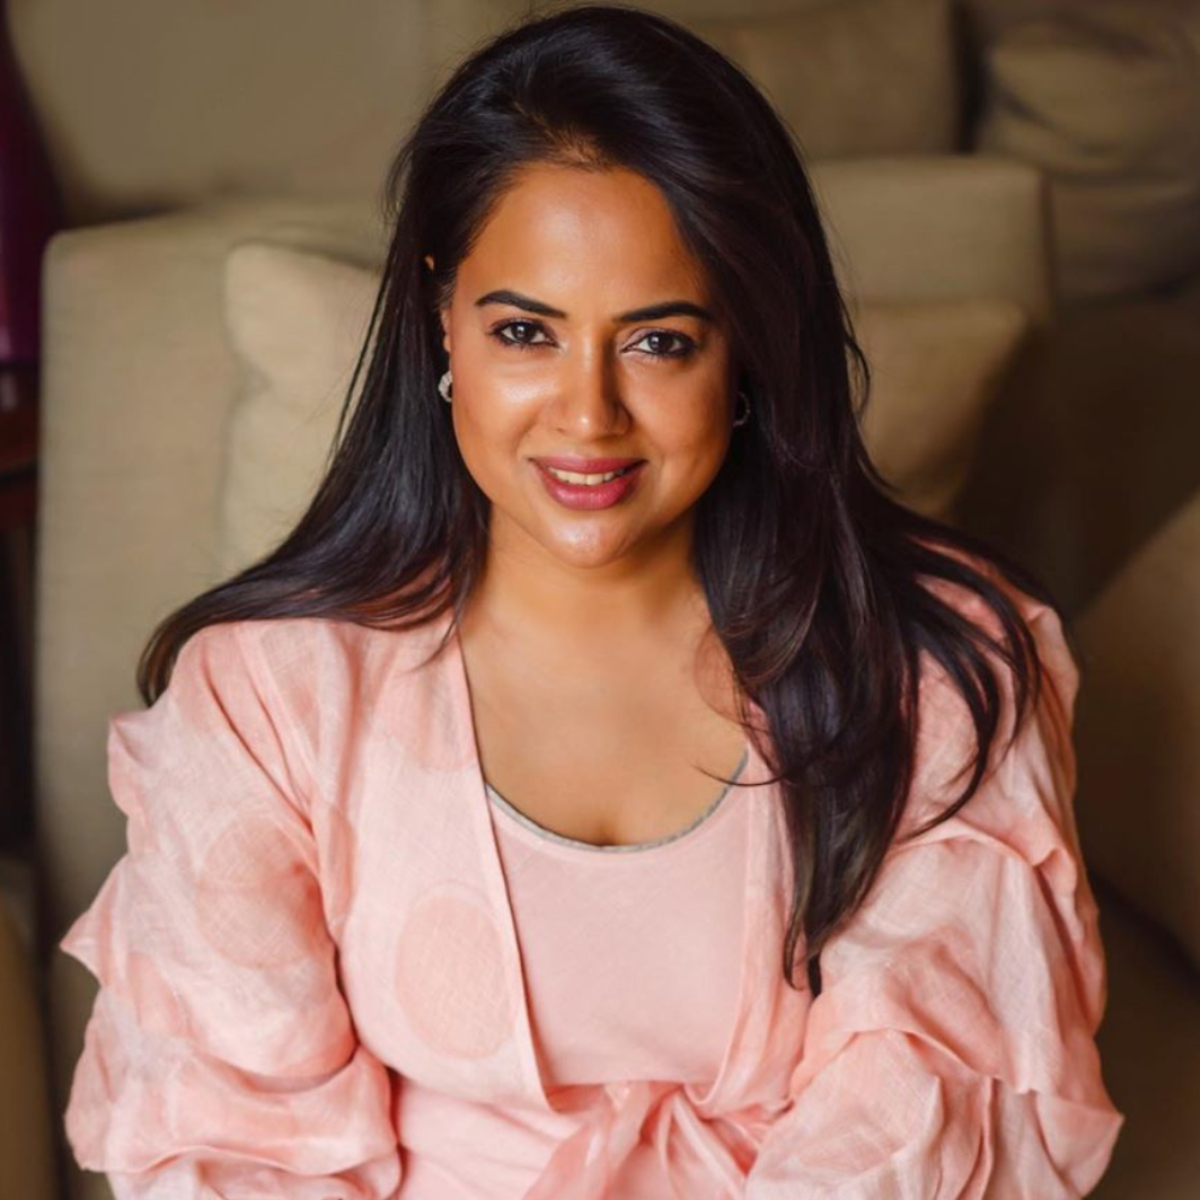 EXCLUSIVE: Sameera Reddy on casting couch: A hero called me unapproachable, vowed to never work with me again